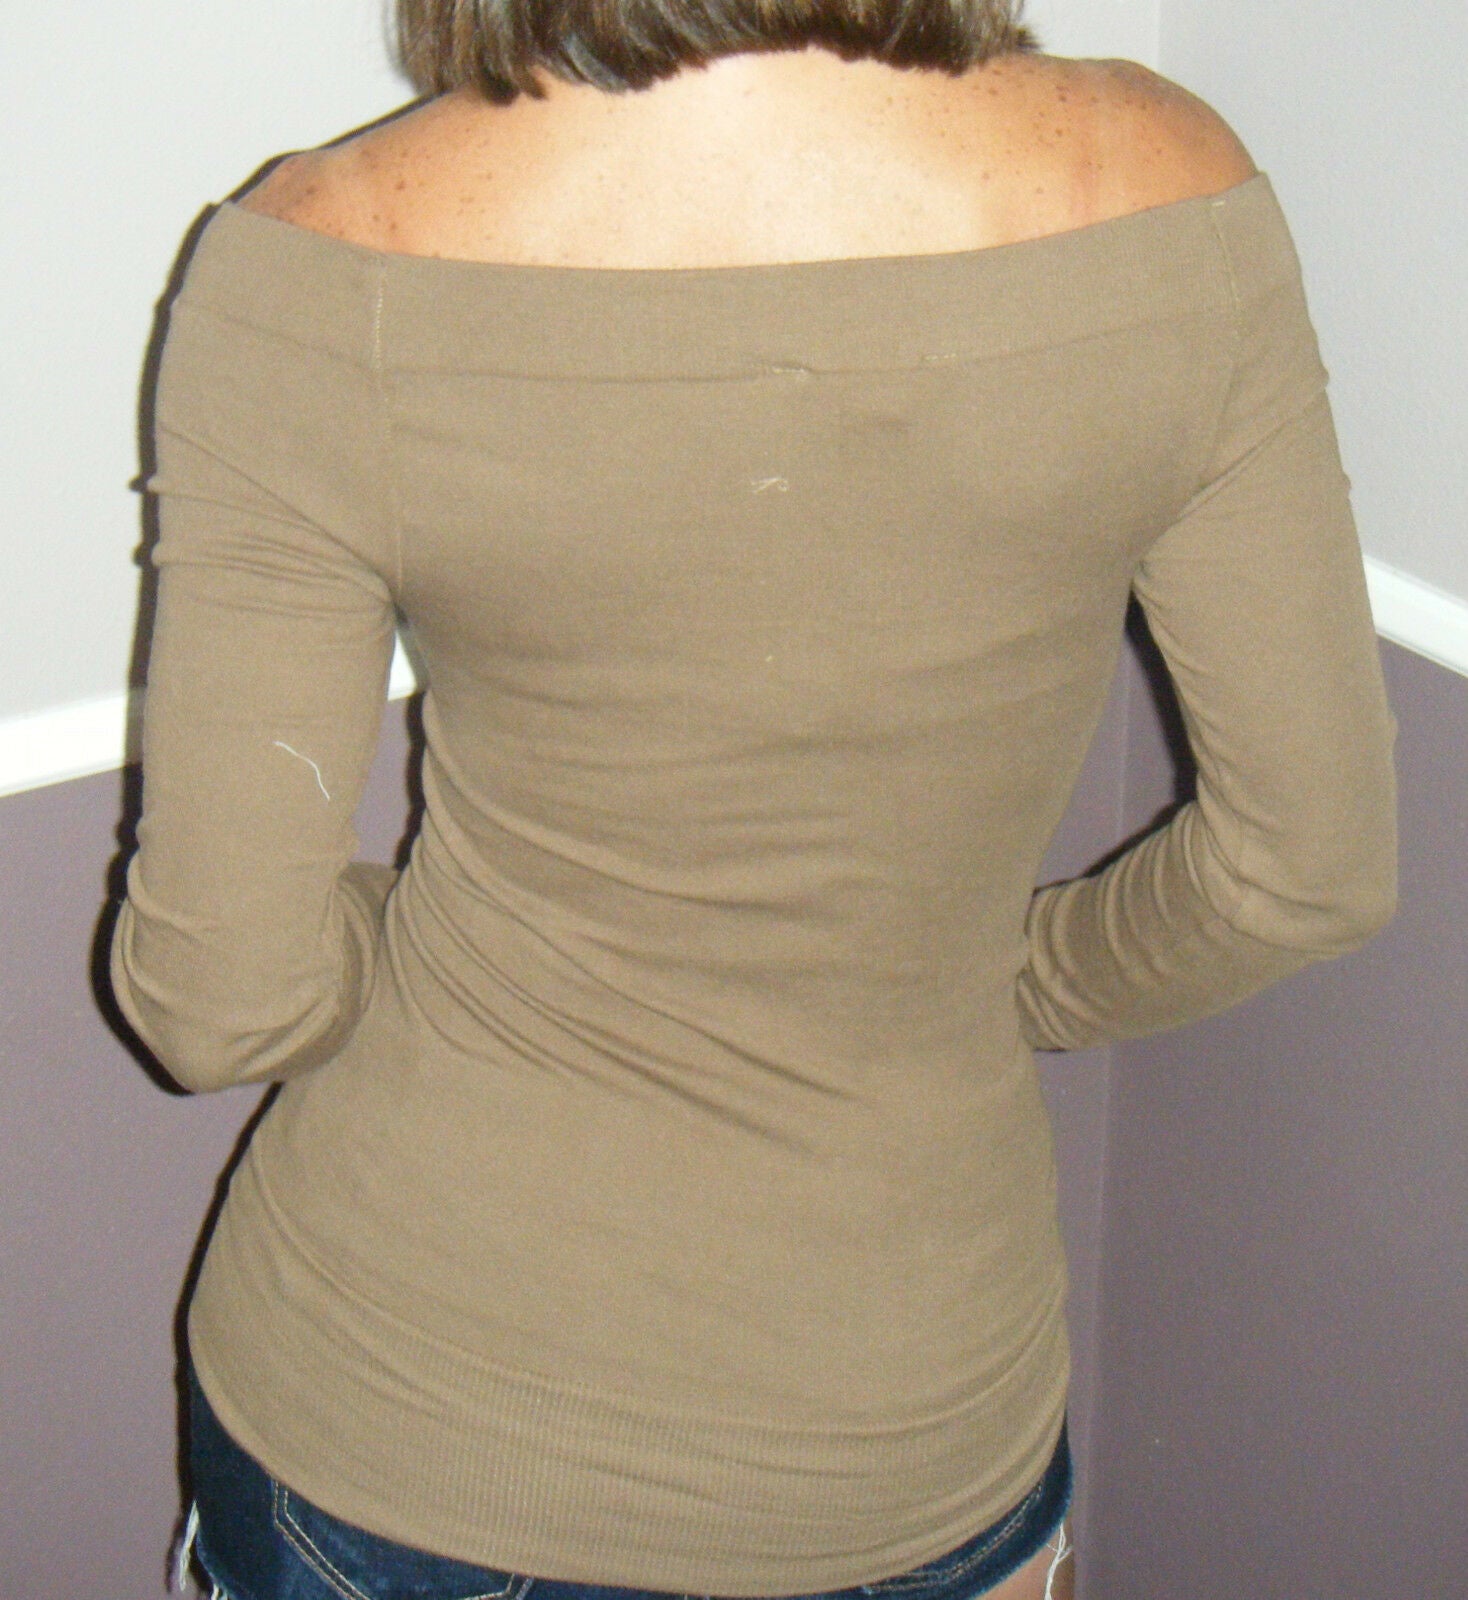 Very Sexy Low Cut Cleavage Off Shoulder Sweater Blouse Shirt Top Mocha